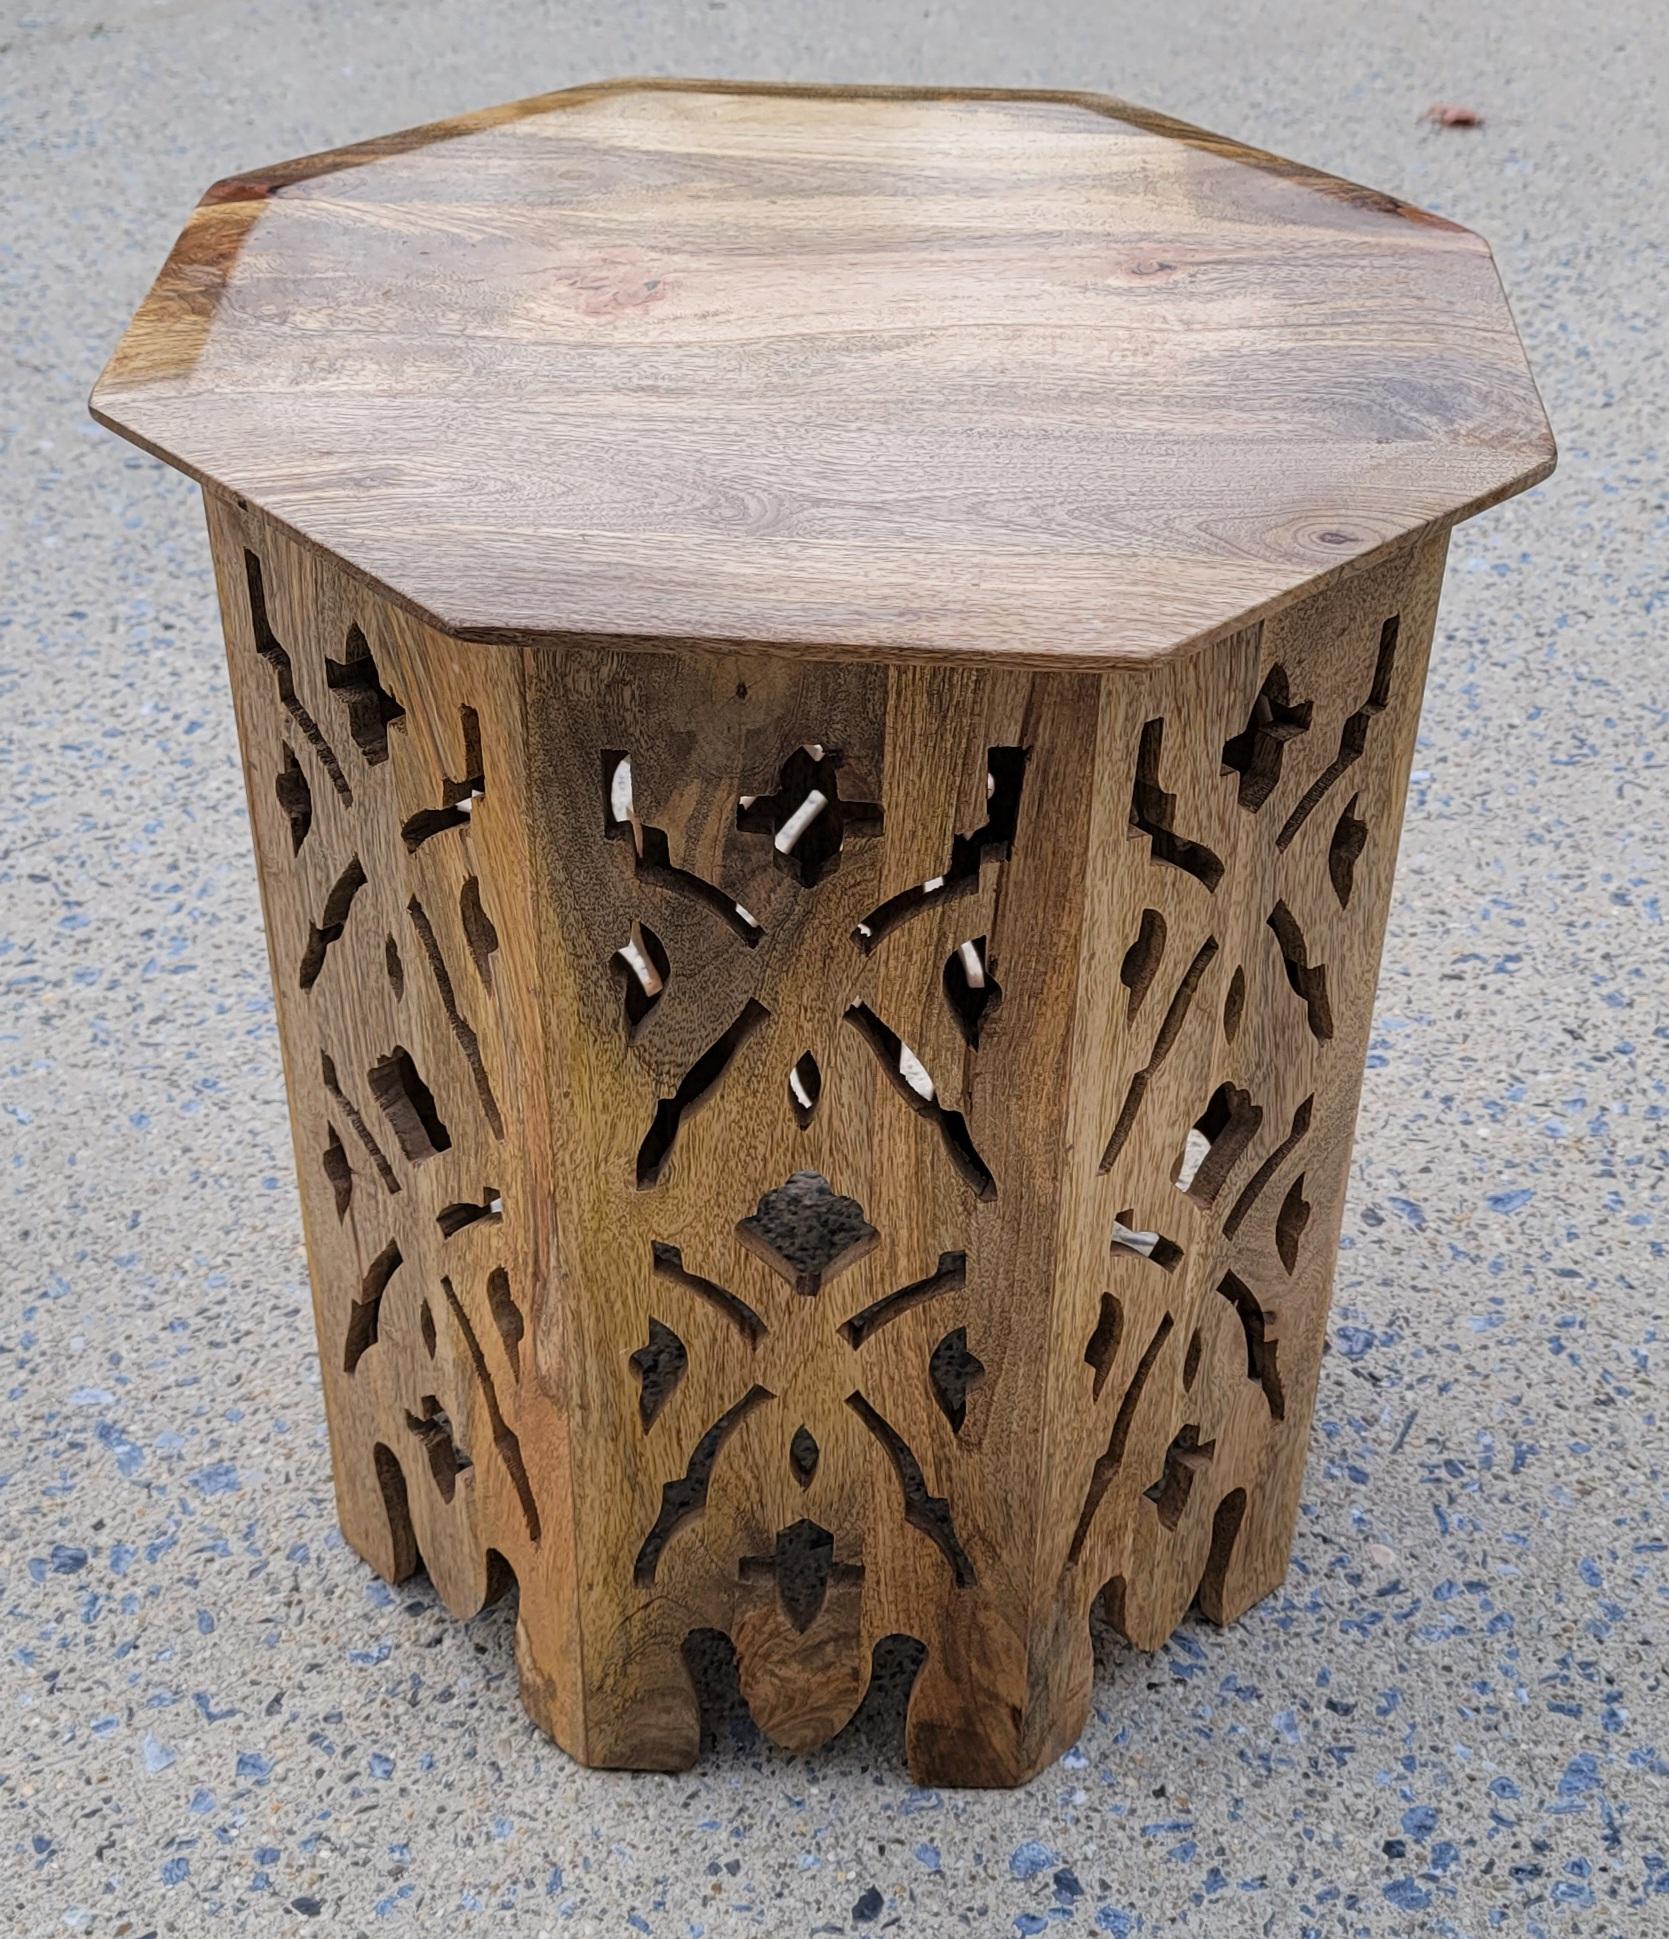 Hand-Carved Hand Crafted Solid Walnut Octogonal Side Tables, a Pair For Sale